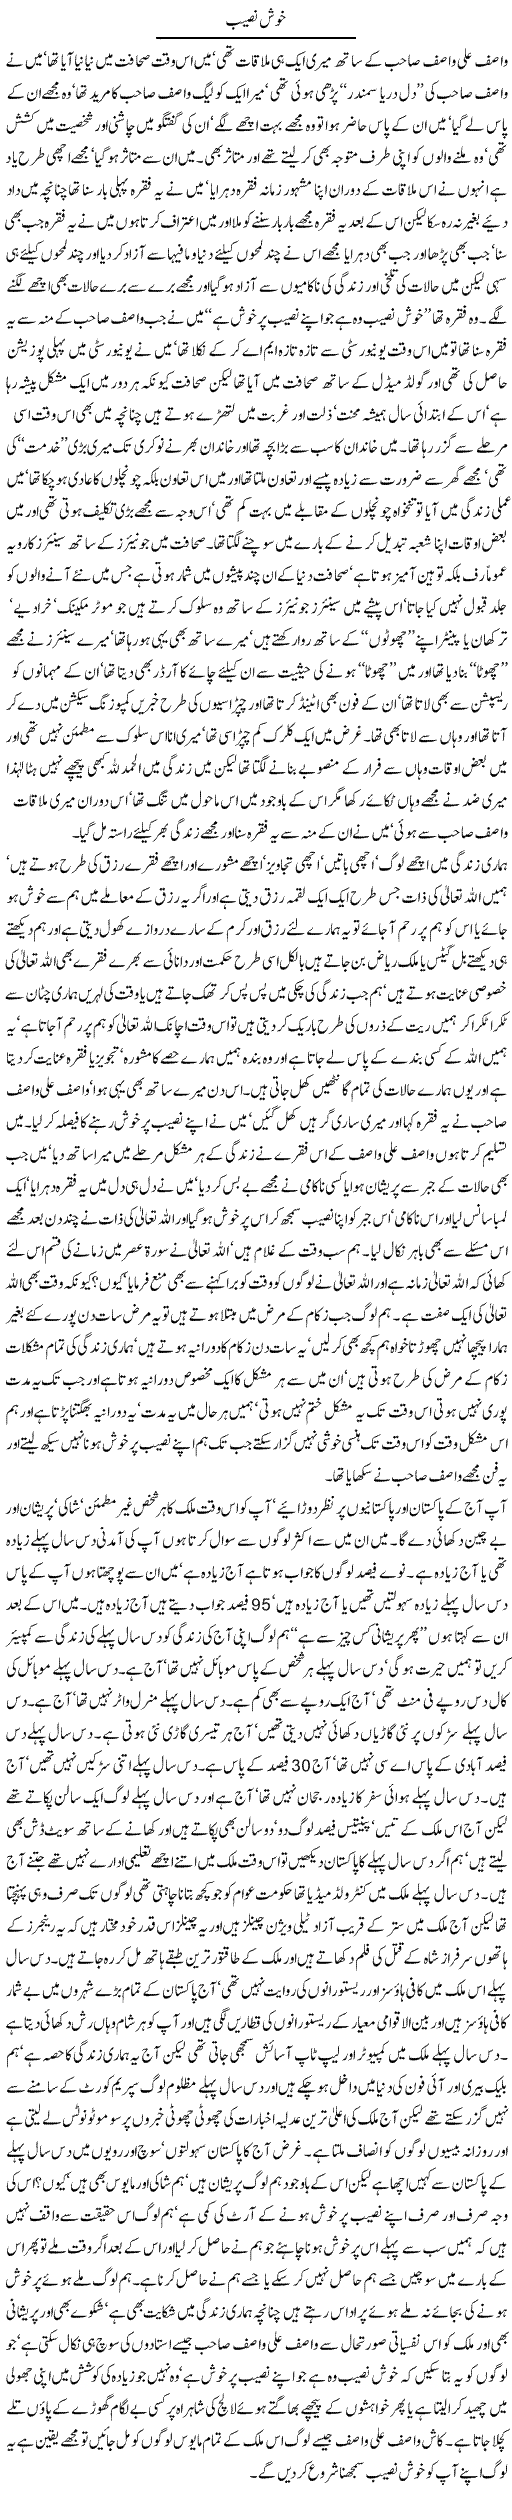 The Lucky Person Express Column Javed Chaudhry 21 June 2011